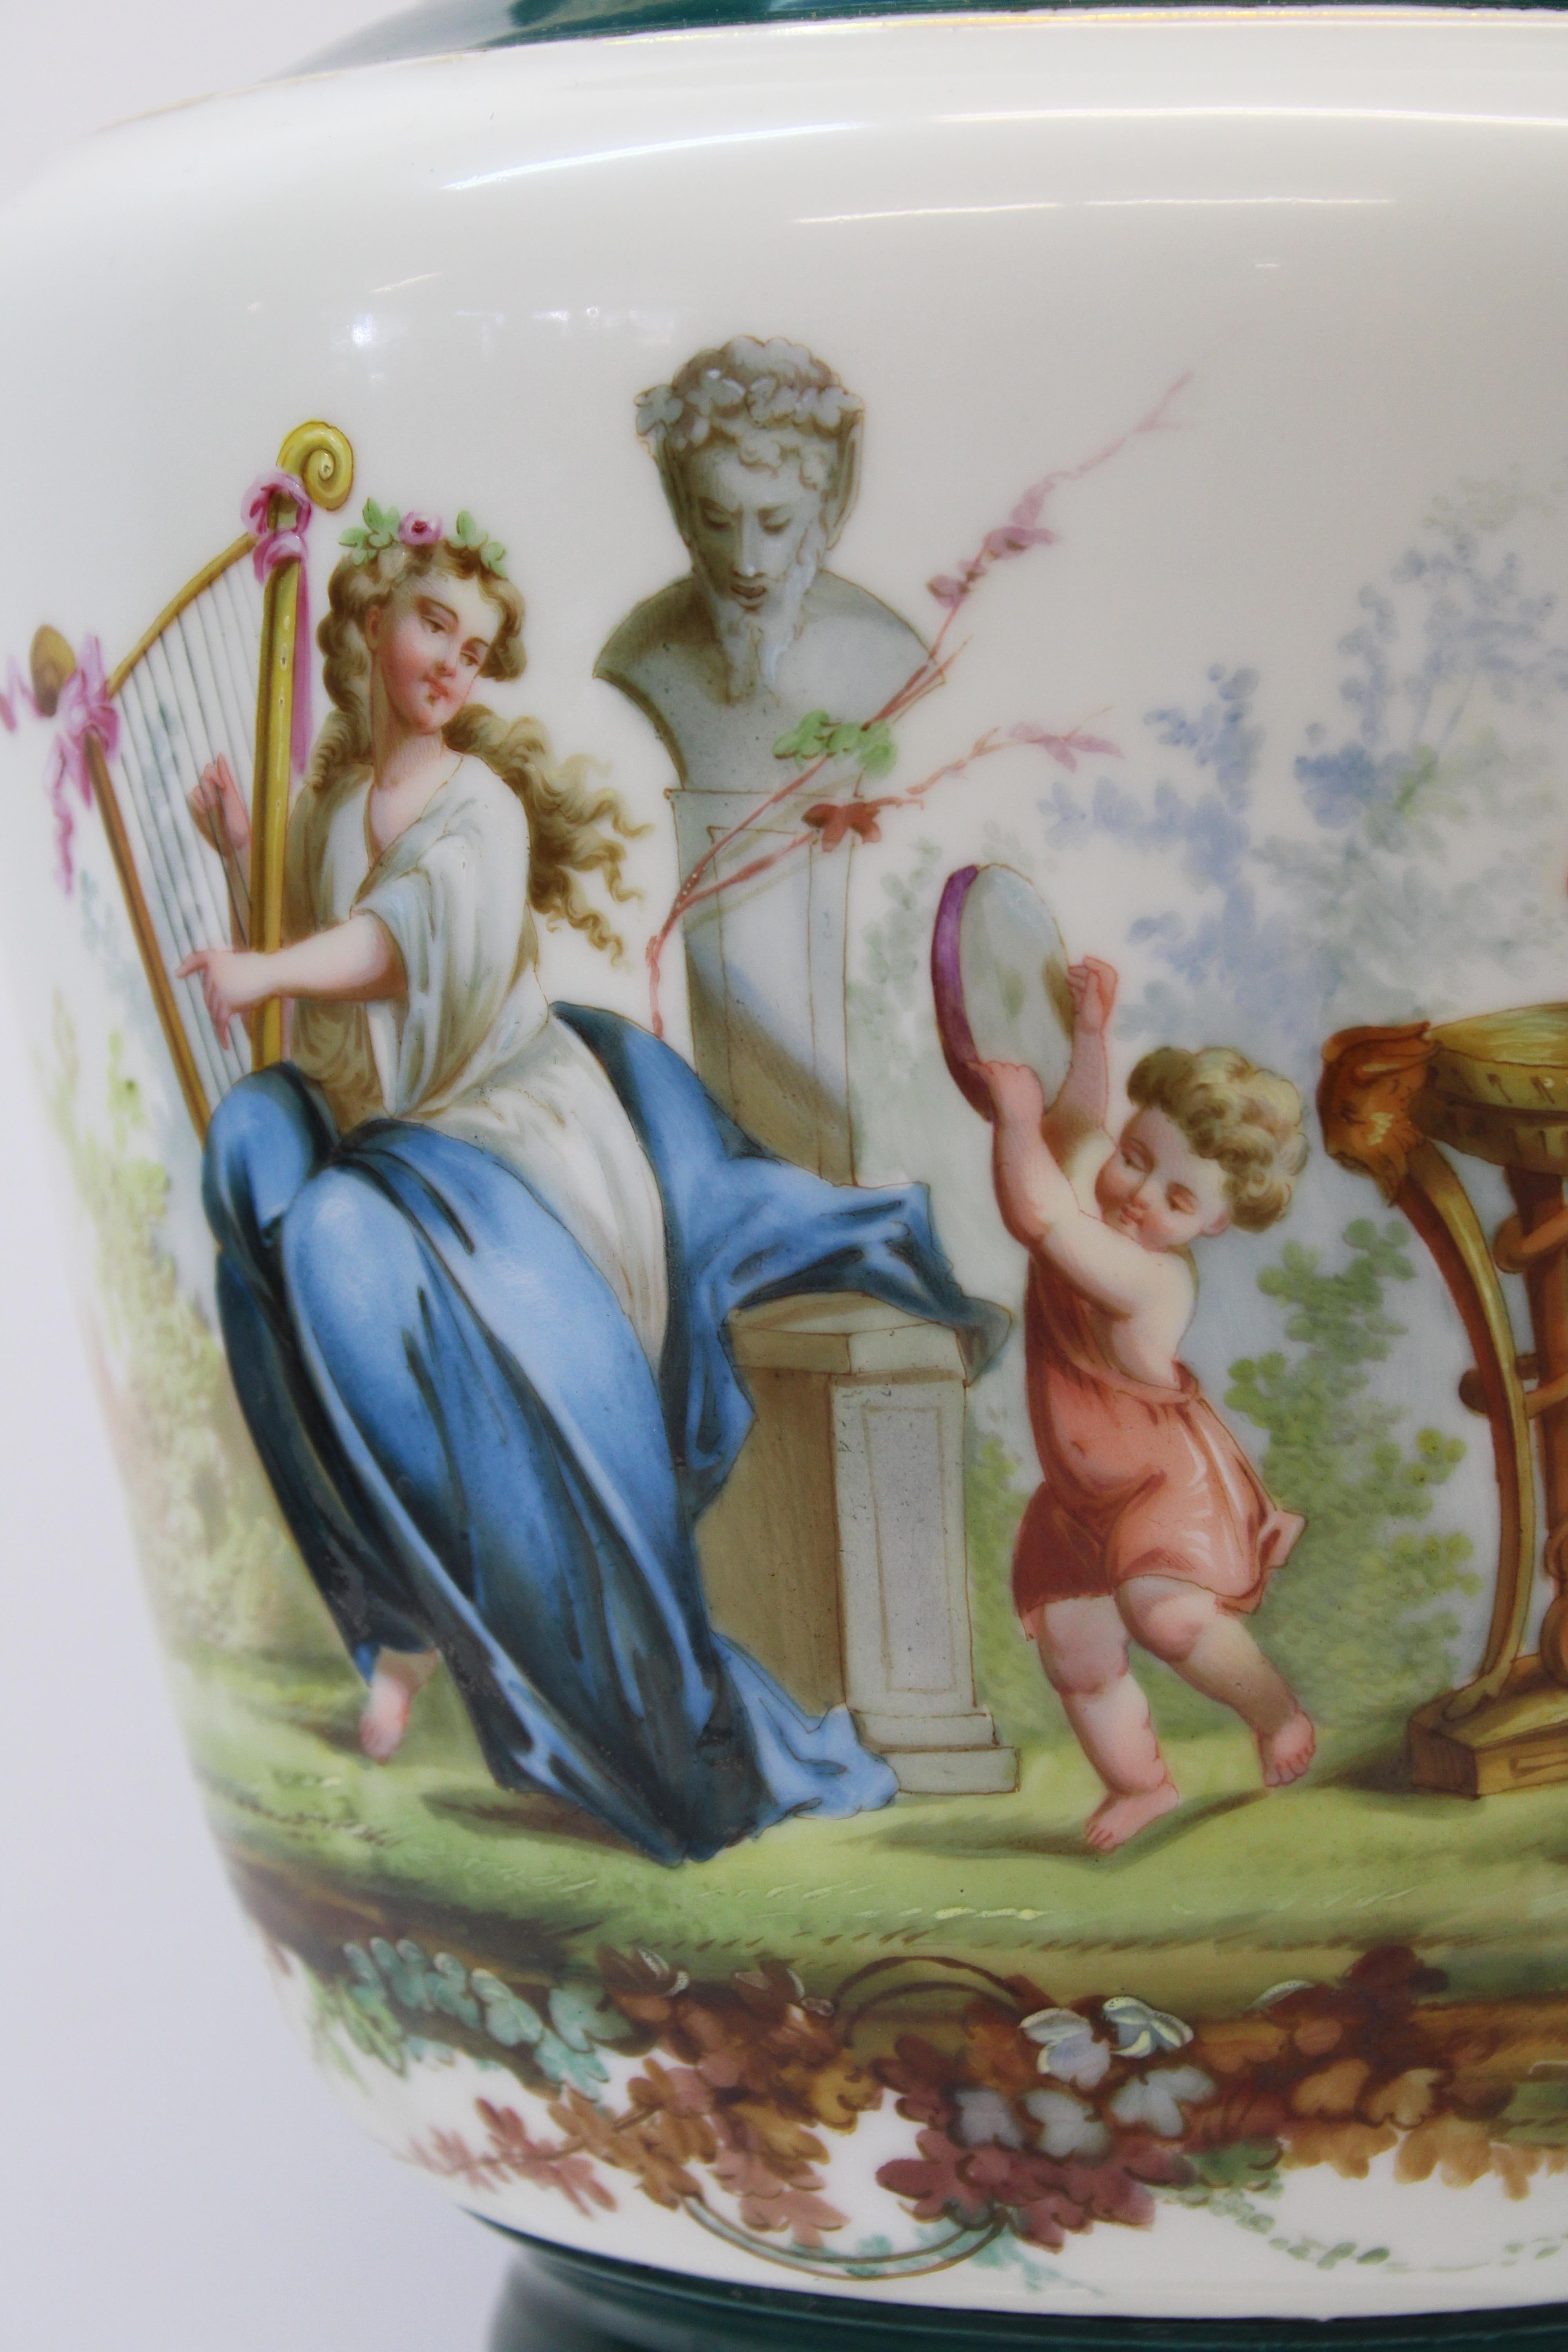 C. Late 19th century - Early 20th century

Beautiful hand painted French Porcelain vase w/ gilded accents depicting Italian scene.